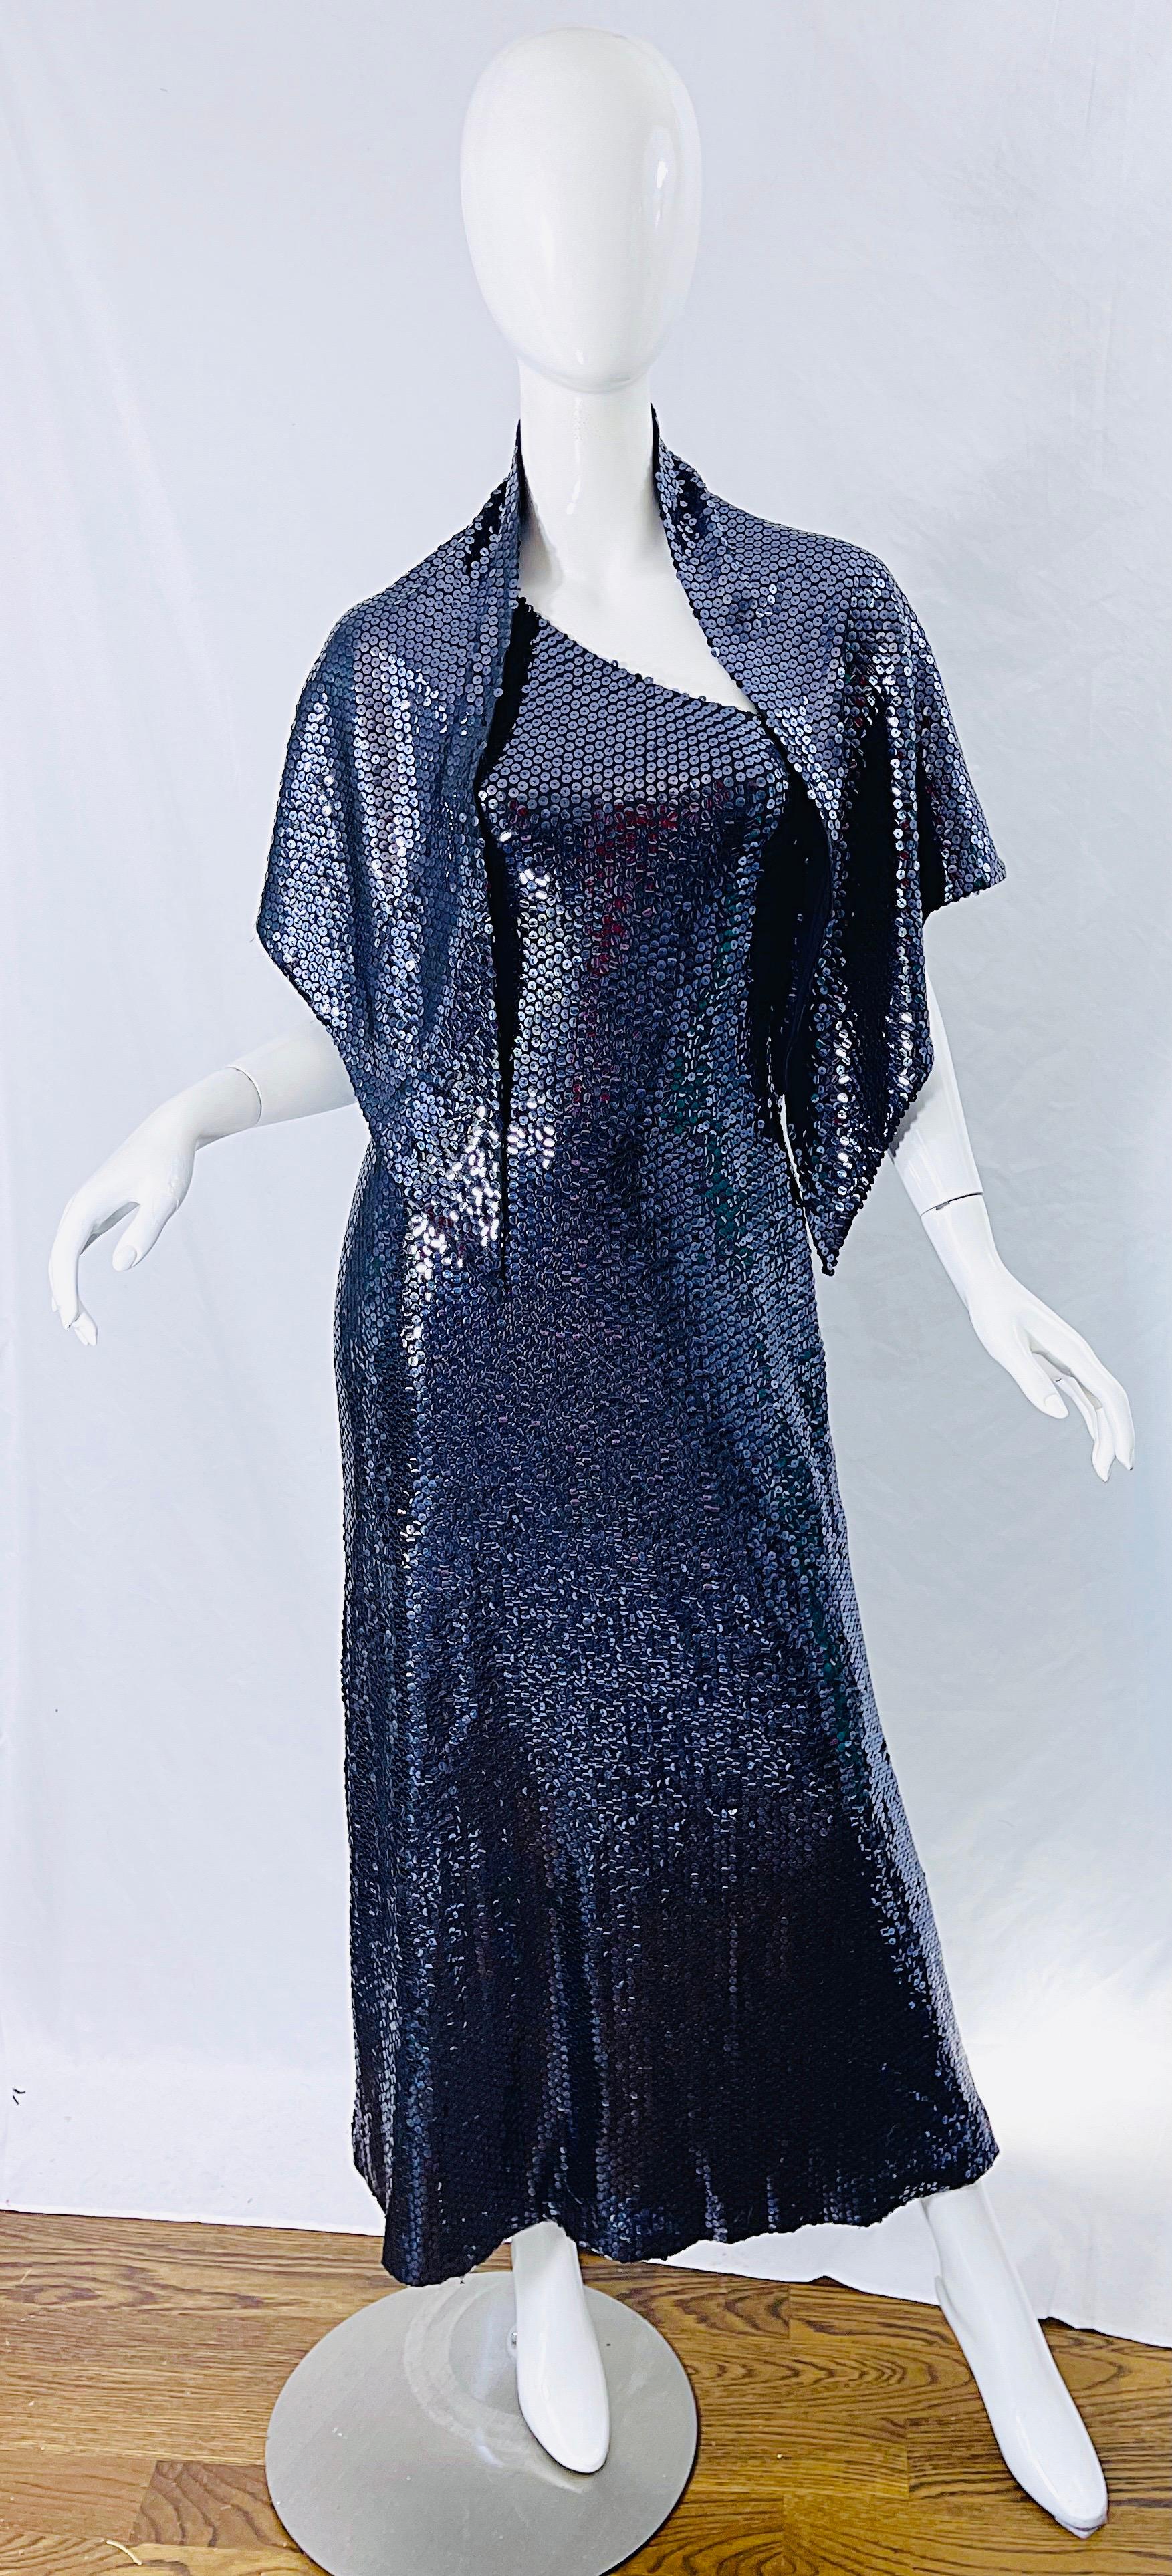 Rare and iconic 1970s HALSTON navy blue sequin one shoulder silk jersey full length disco dress and shawl ensemble ! Thousands of hand sewn sequins throughout the entire gown and shawl. Luxurious silk jersey stretches to fit. Hidden zipper up the